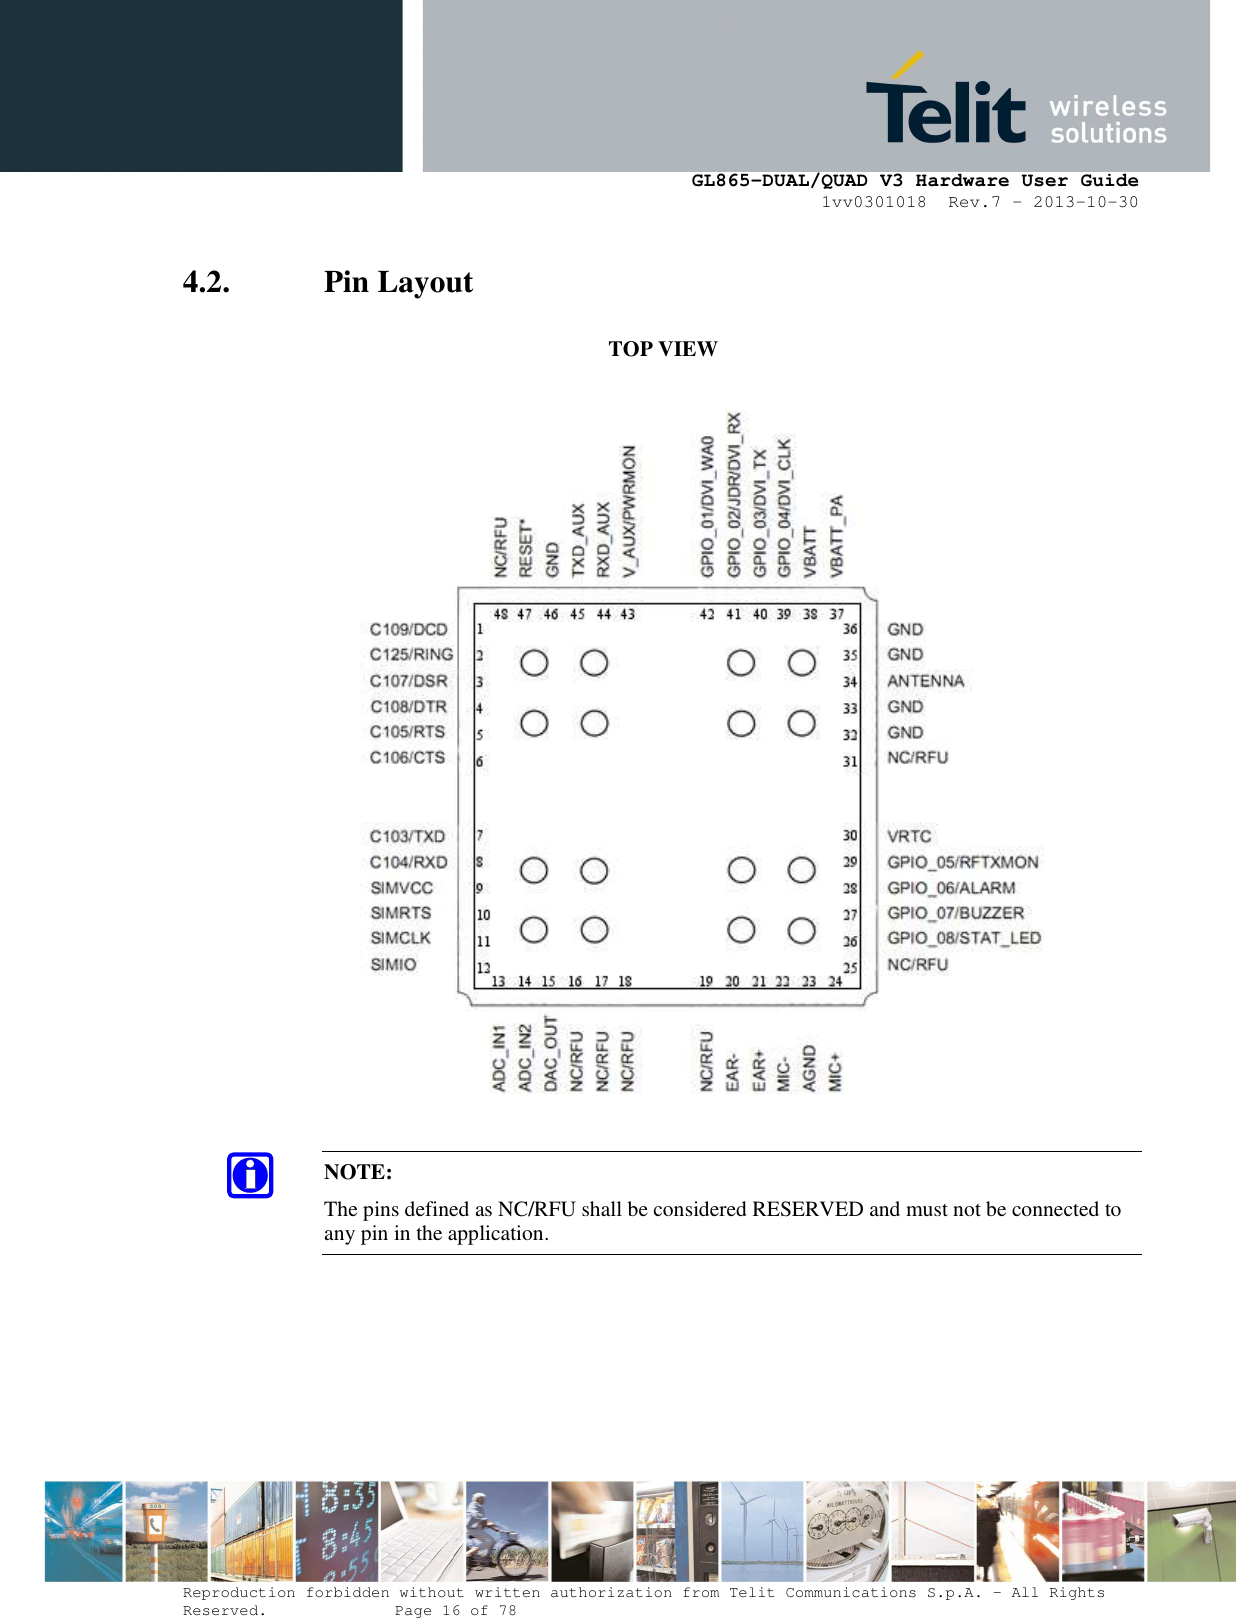      GL865-DUAL/QUAD V3 Hardware User Guide 1vv0301018  Rev.7 – 2013-10-30  Reproduction forbidden without written authorization from Telit Communications S.p.A. - All Rights Reserved.    Page 16 of 78 Mod. 0805 2011-07 Rev.2 4.2. Pin Layout            TOP VIEW    NOTE: The pins defined as NC/RFU shall be considered RESERVED and must not be connected to any pin in the application. 